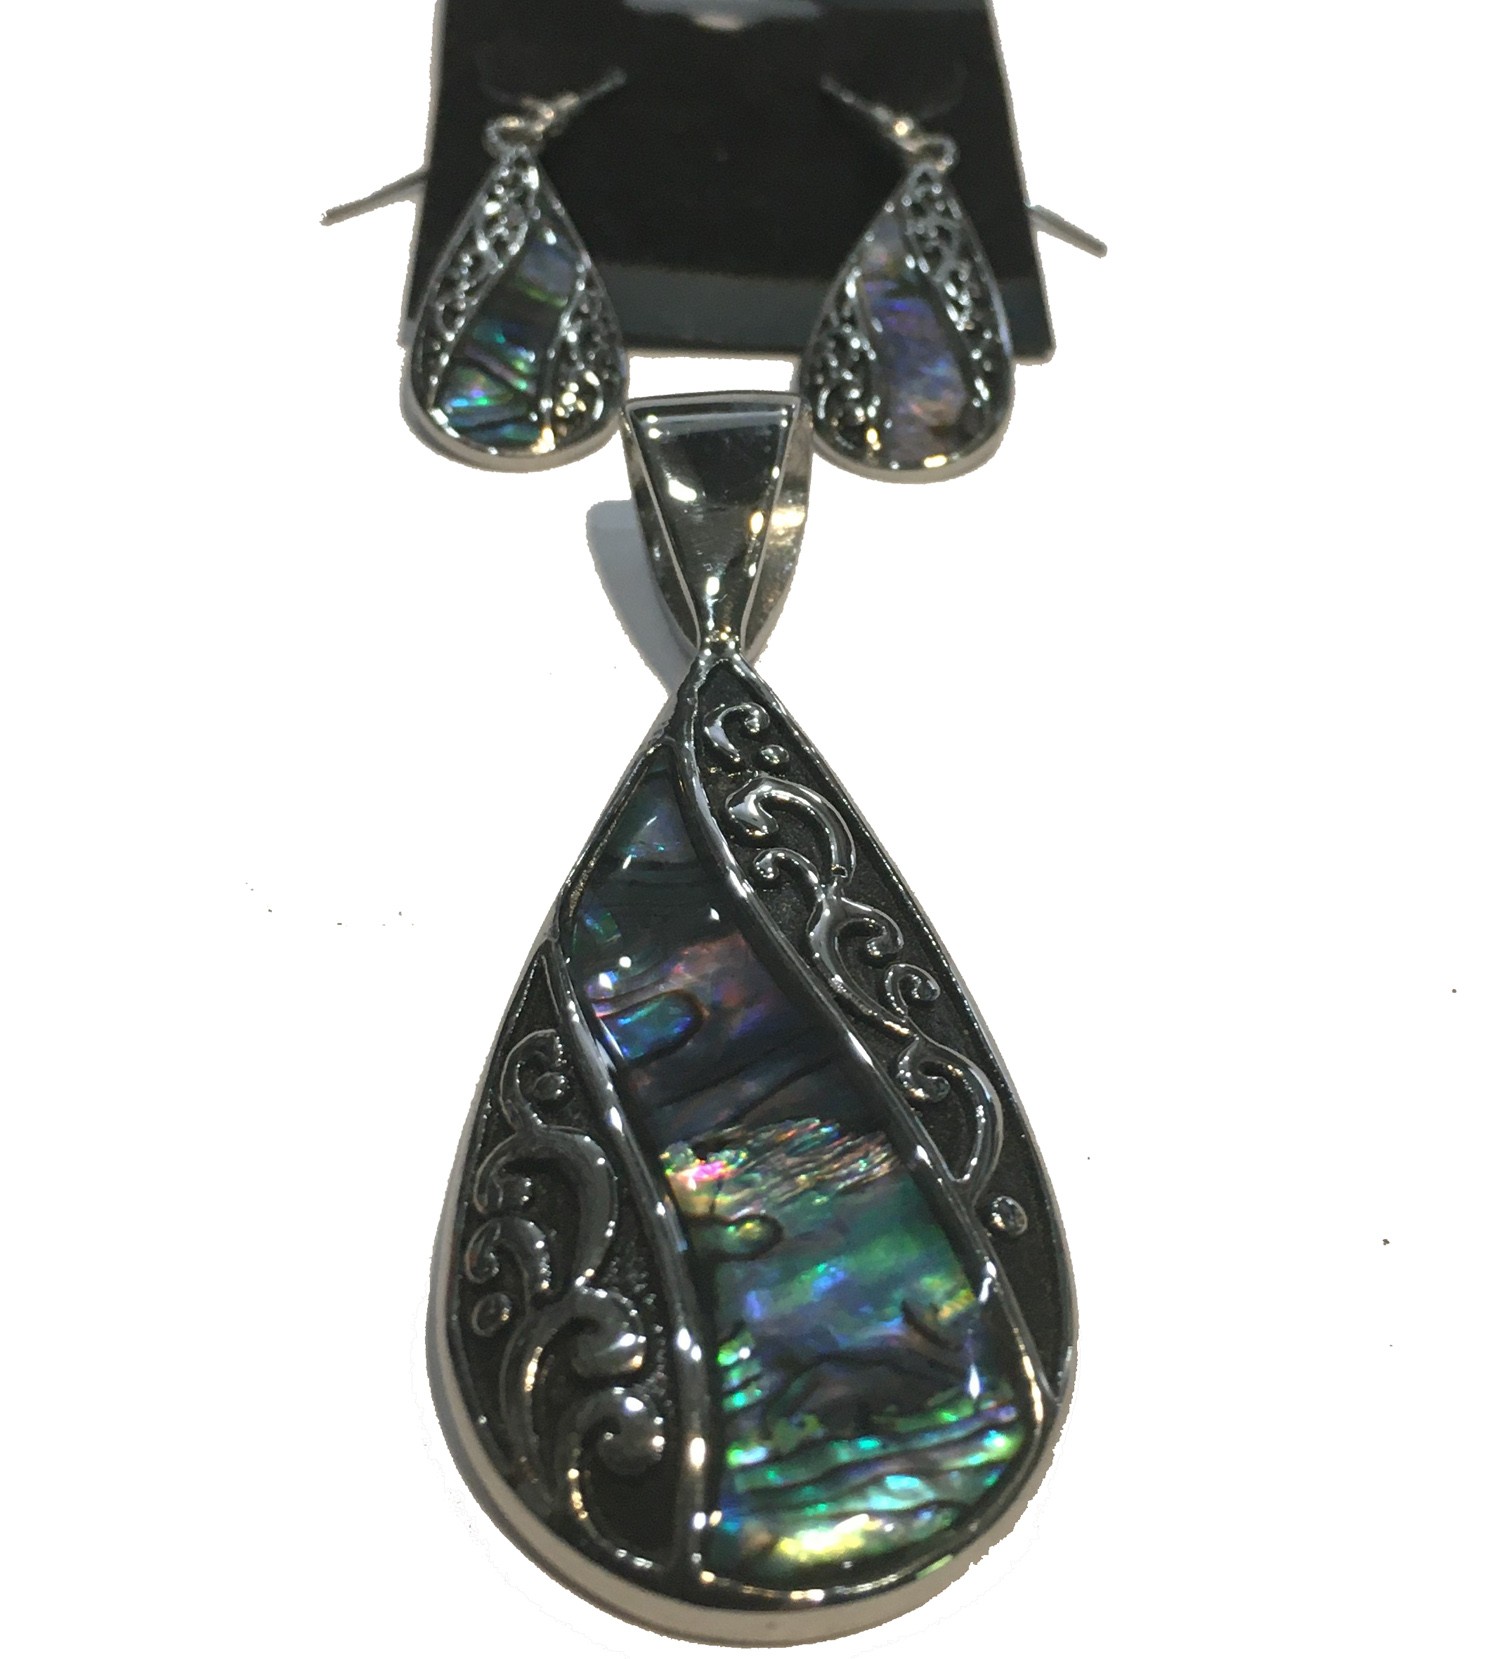 TEARDROP ABALONE PENDANT WITH MATCHING EARRINGS STAINLESS STEEL